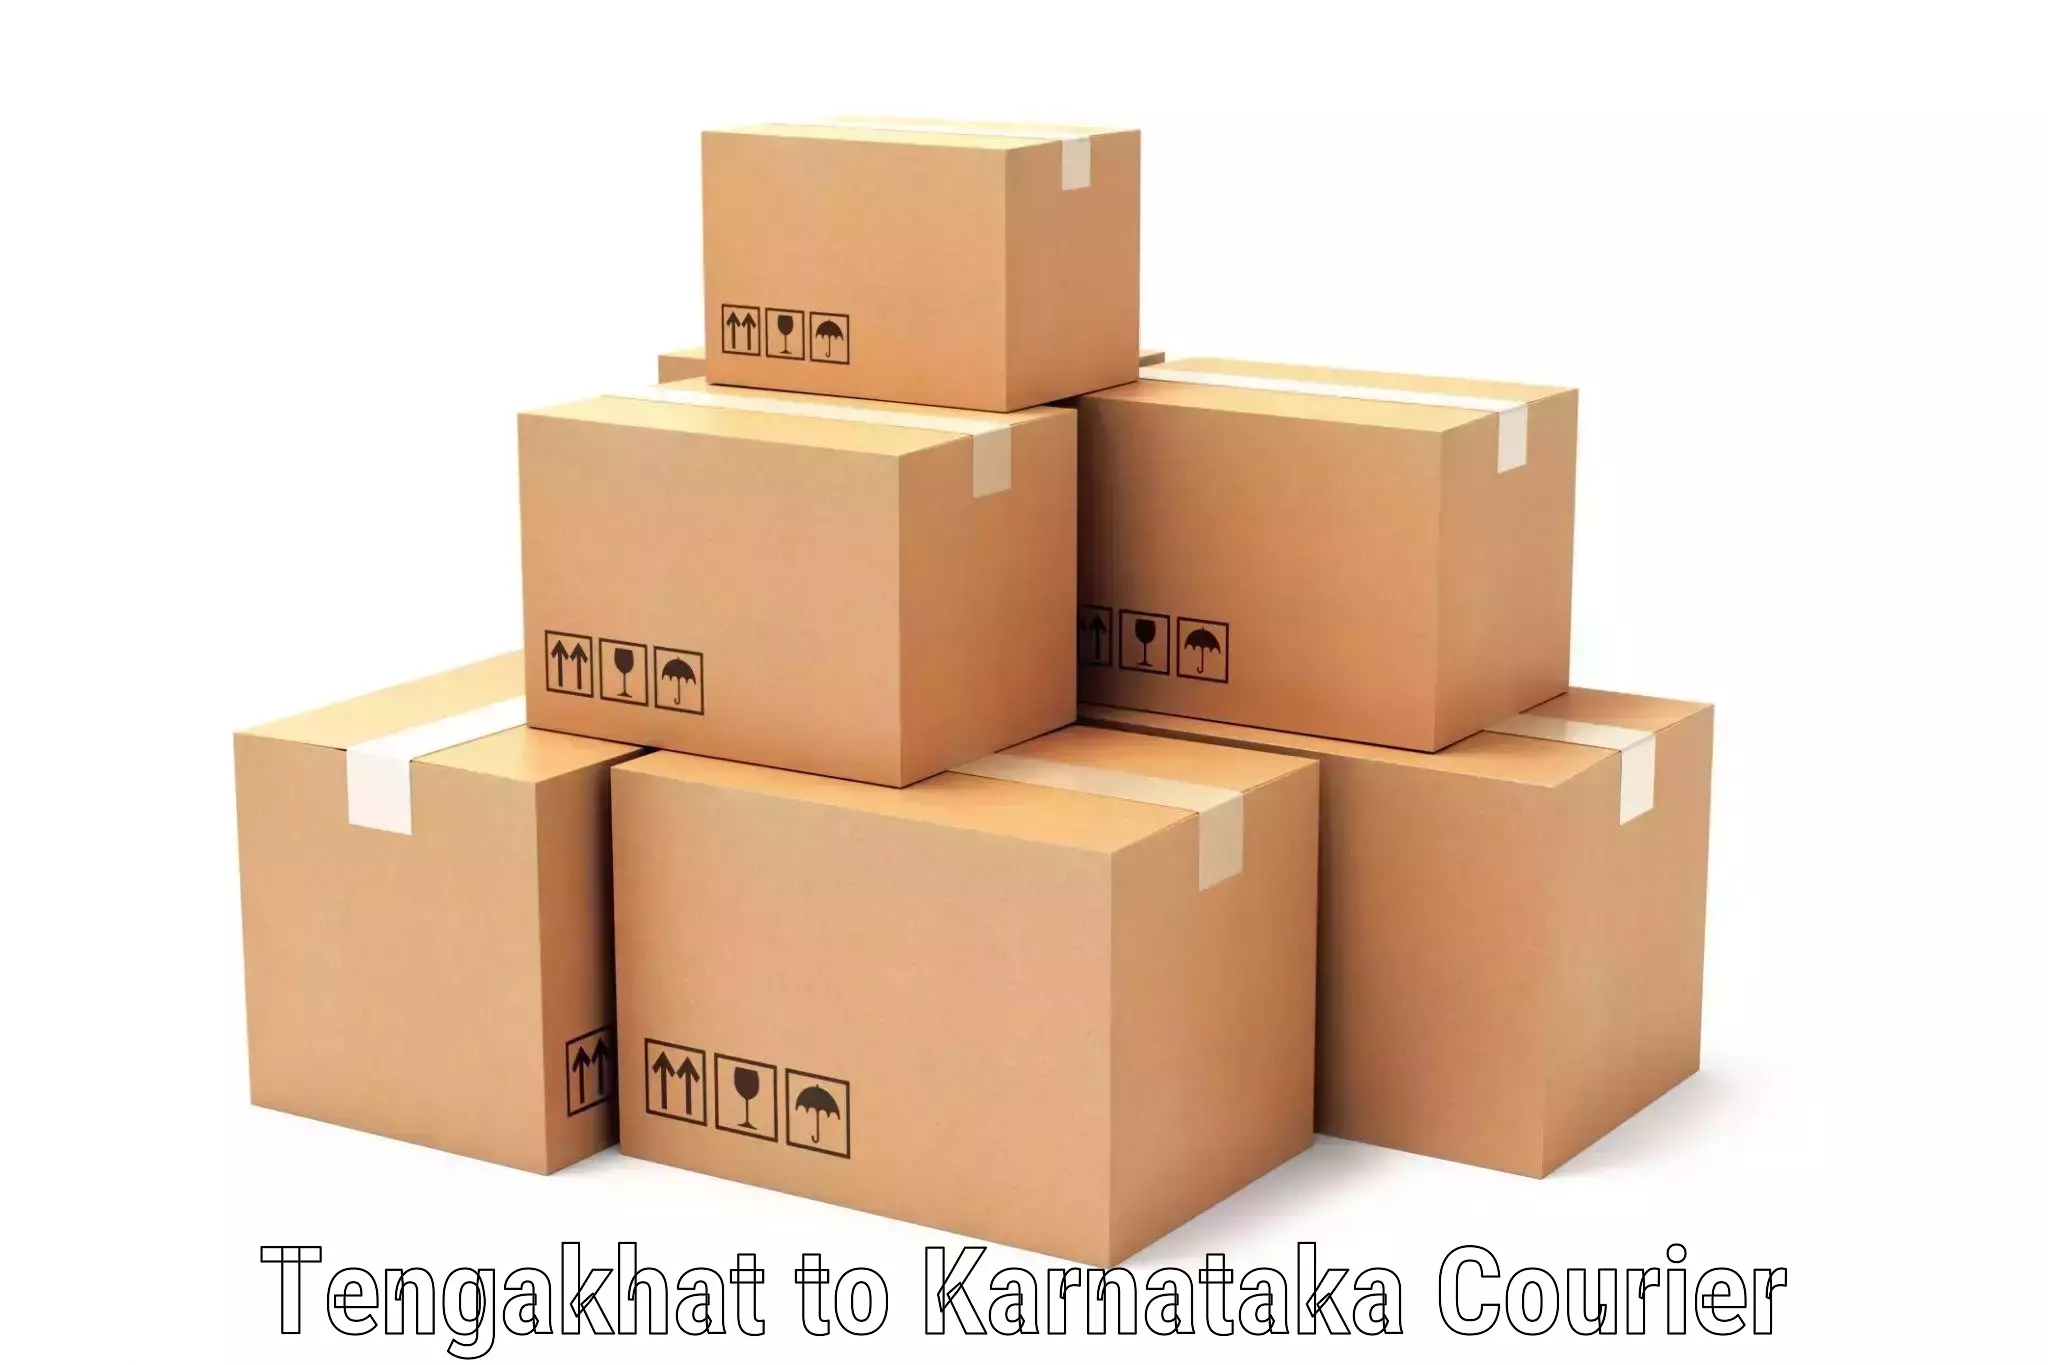 On-demand courier Tengakhat to Mangalore Port